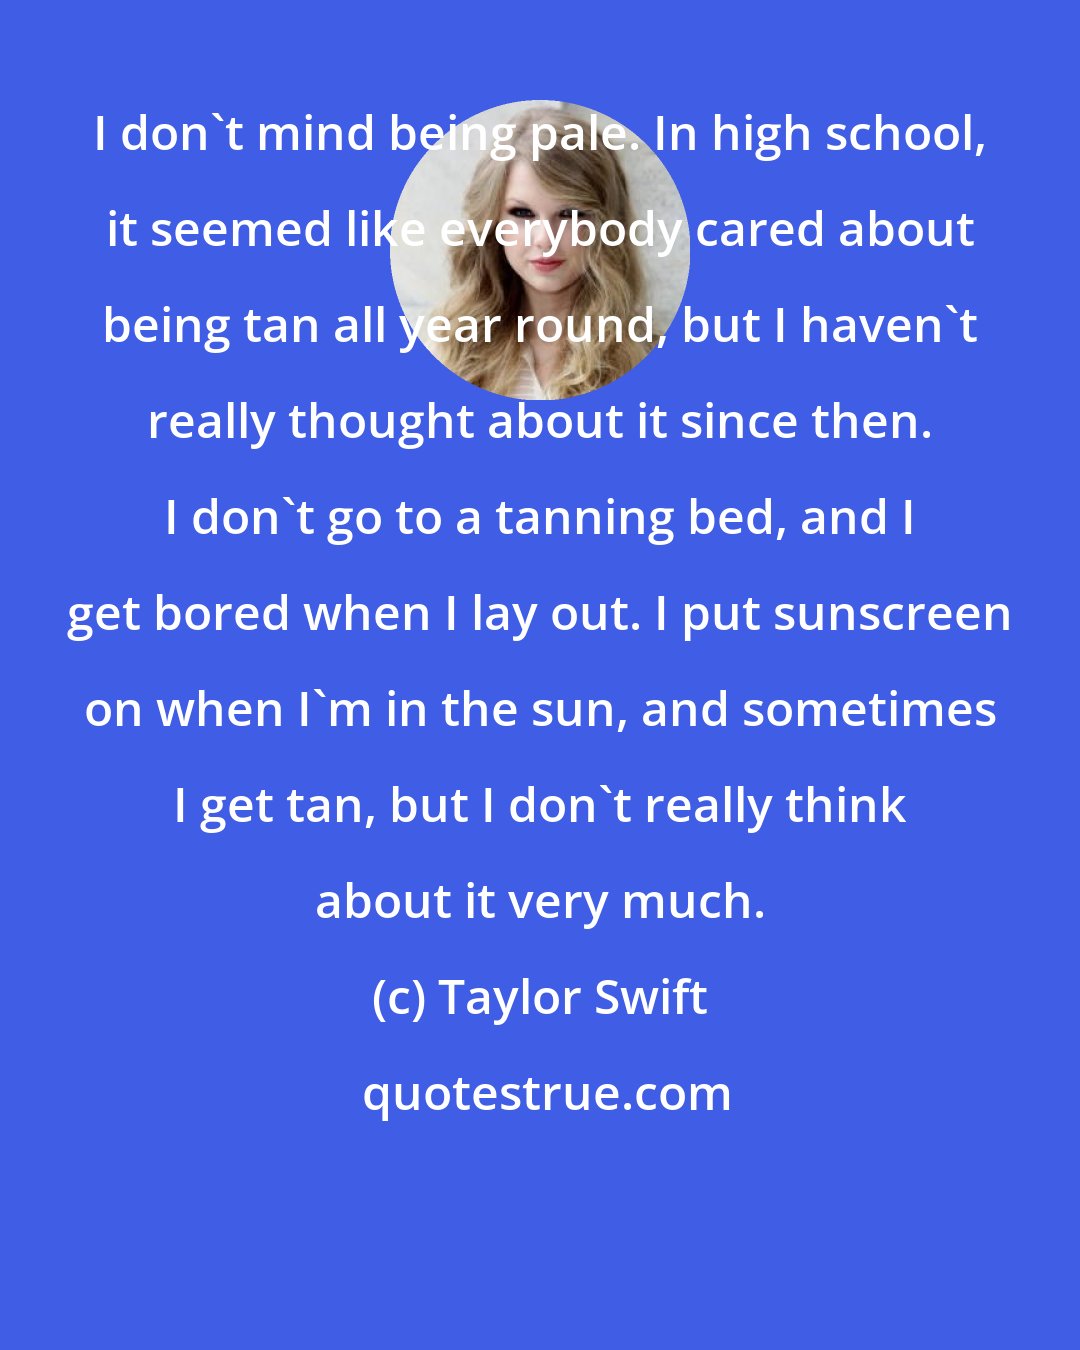 Taylor Swift: I don't mind being pale. In high school, it seemed like everybody cared about being tan all year round, but I haven't really thought about it since then. I don't go to a tanning bed, and I get bored when I lay out. I put sunscreen on when I'm in the sun, and sometimes I get tan, but I don't really think about it very much.